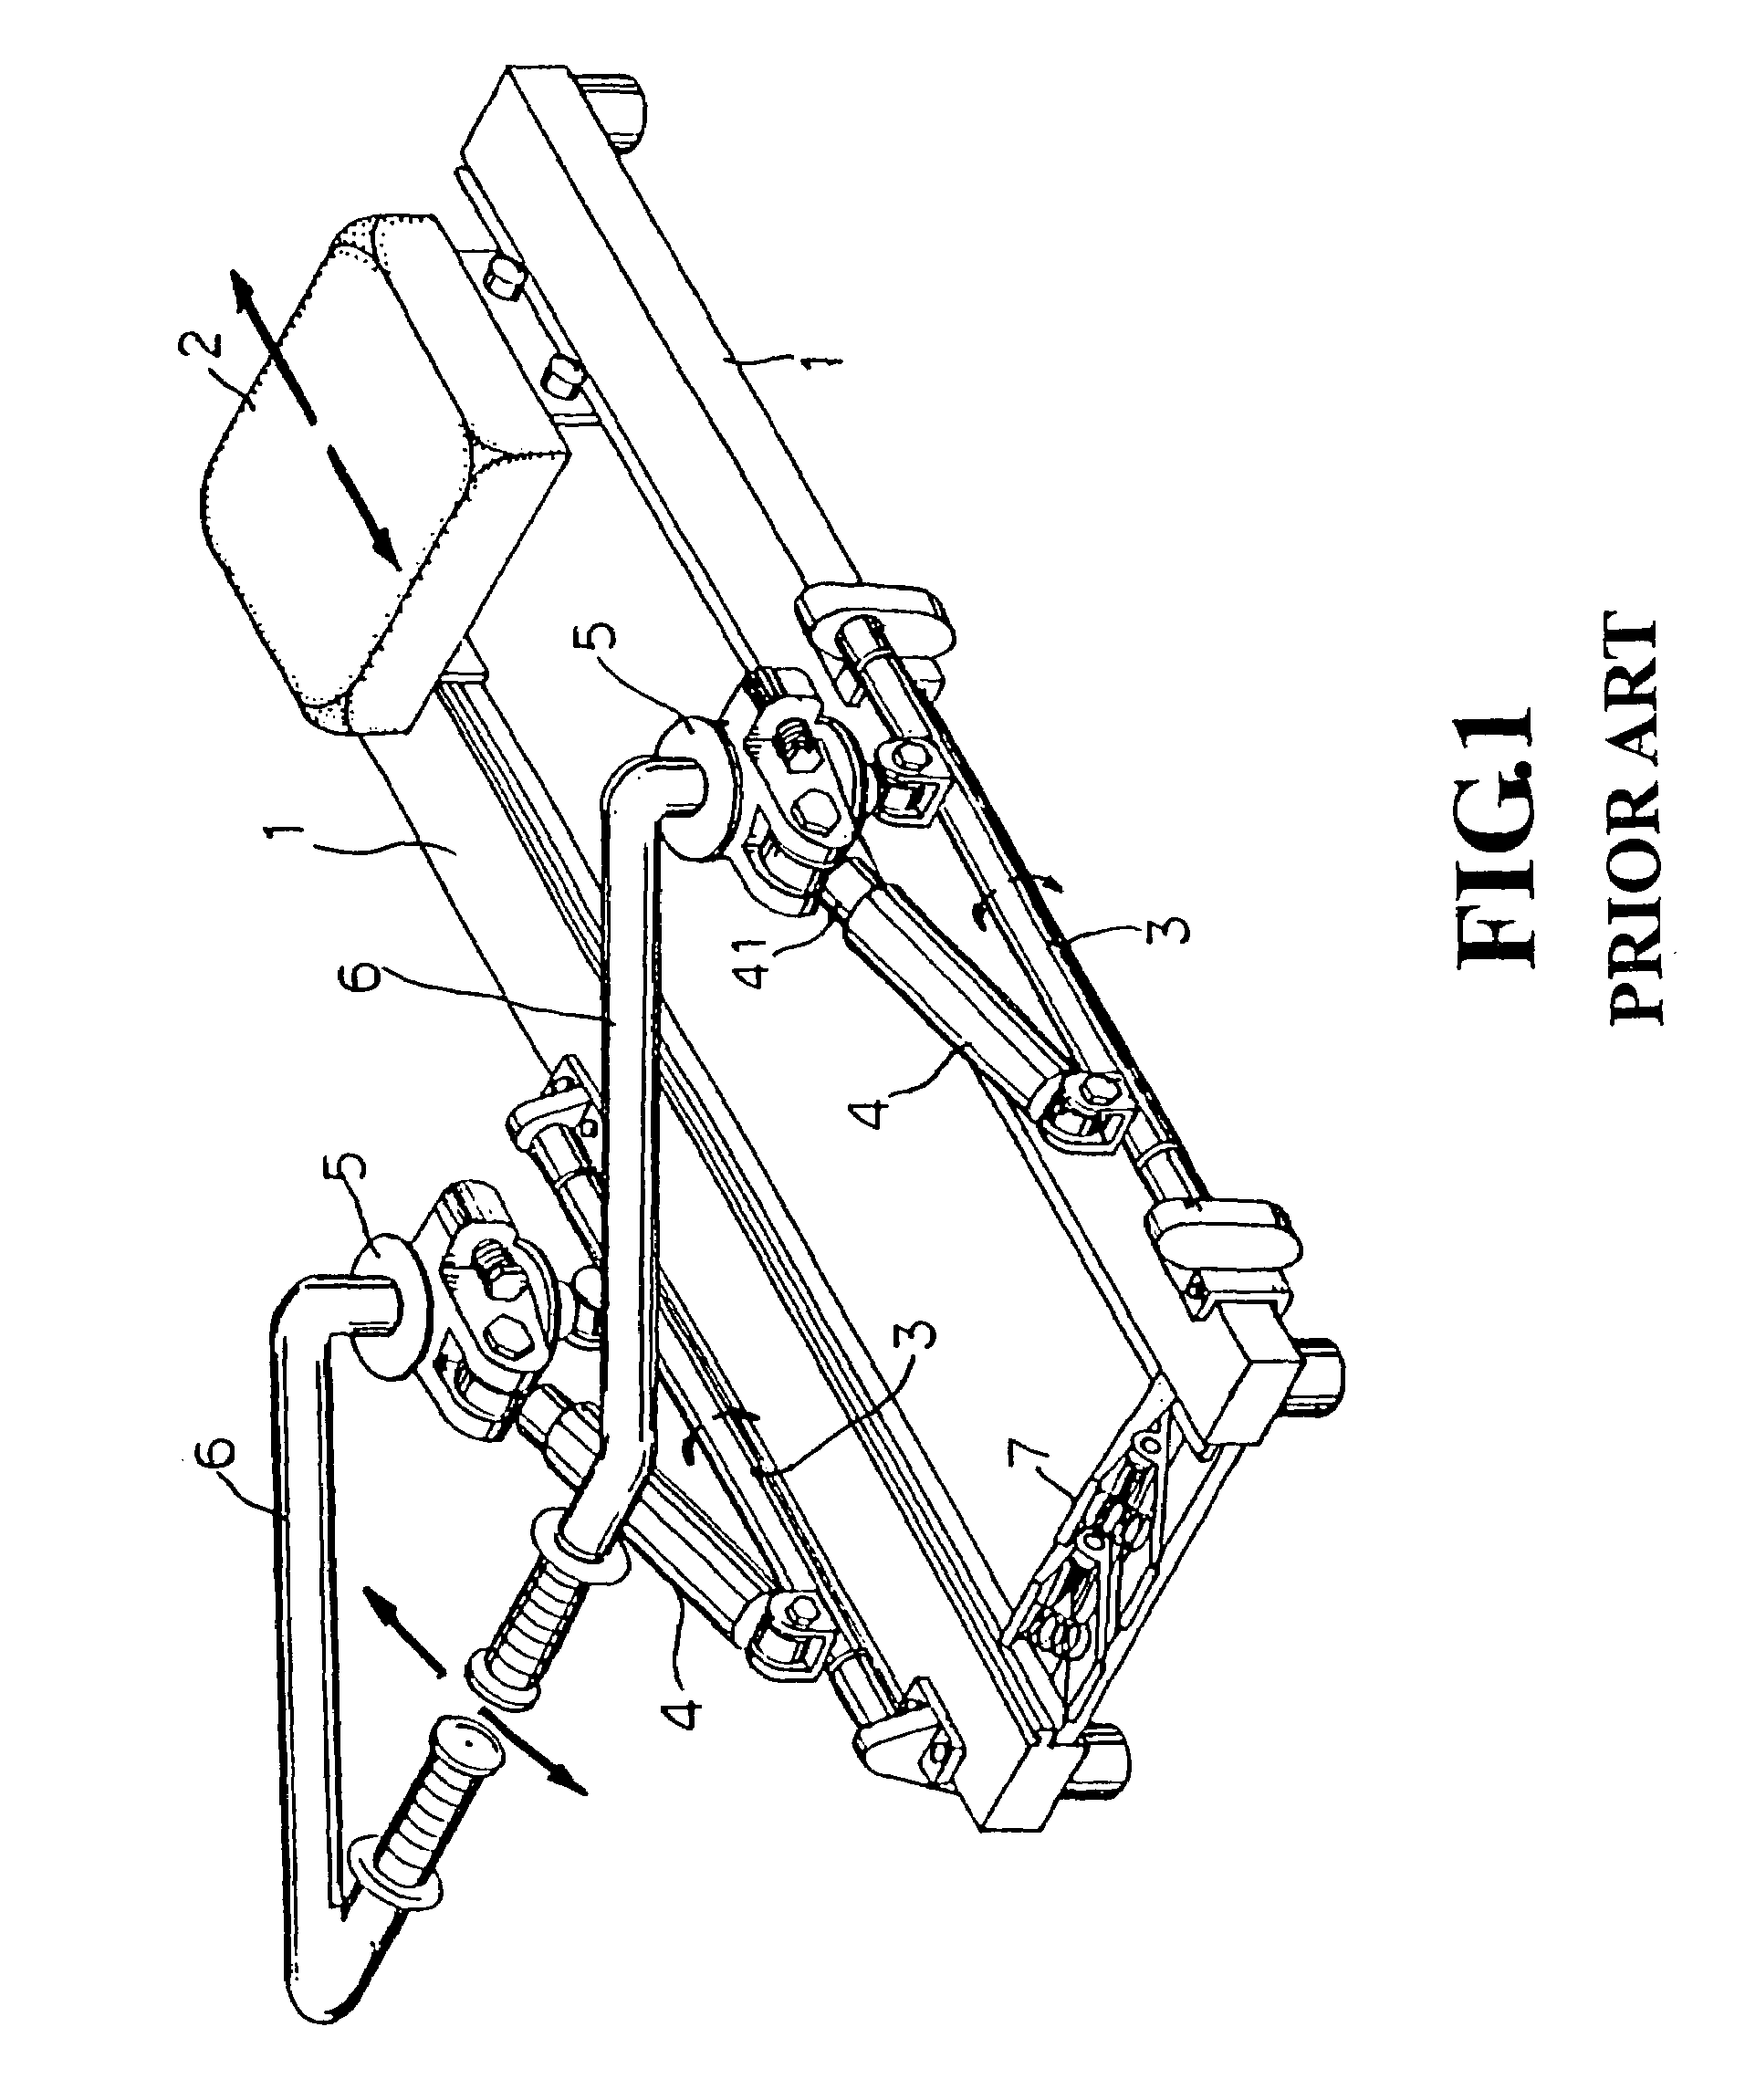 Rowing exercise device